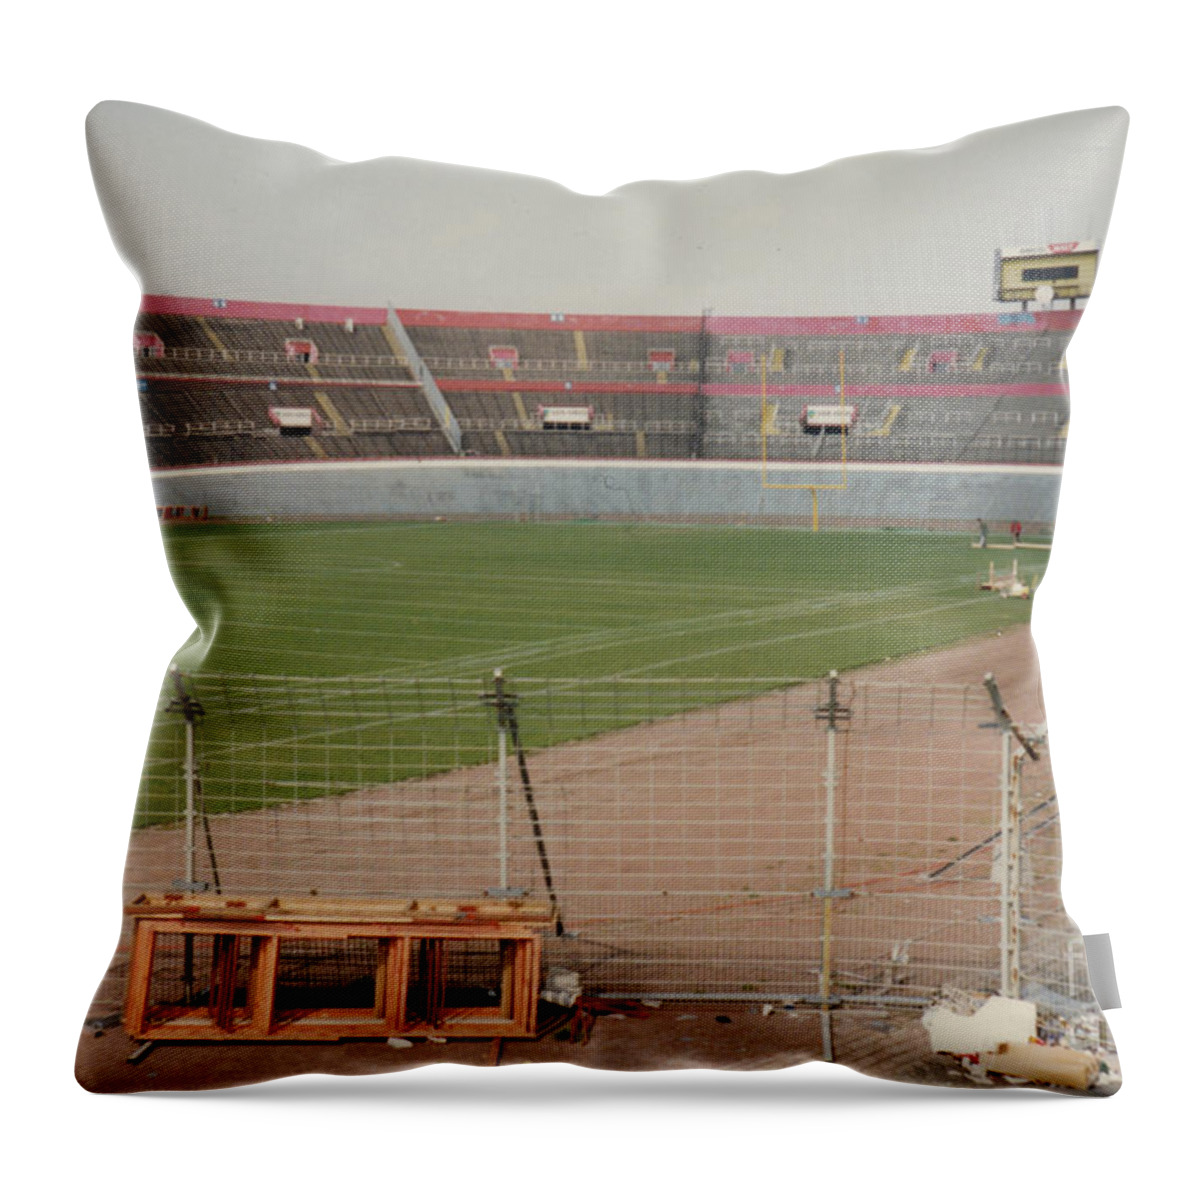 Ajax Throw Pillow featuring the photograph Amsterdam Olympic Stadium - South End Grandstand 1 - April 1996 by Legendary Football Grounds